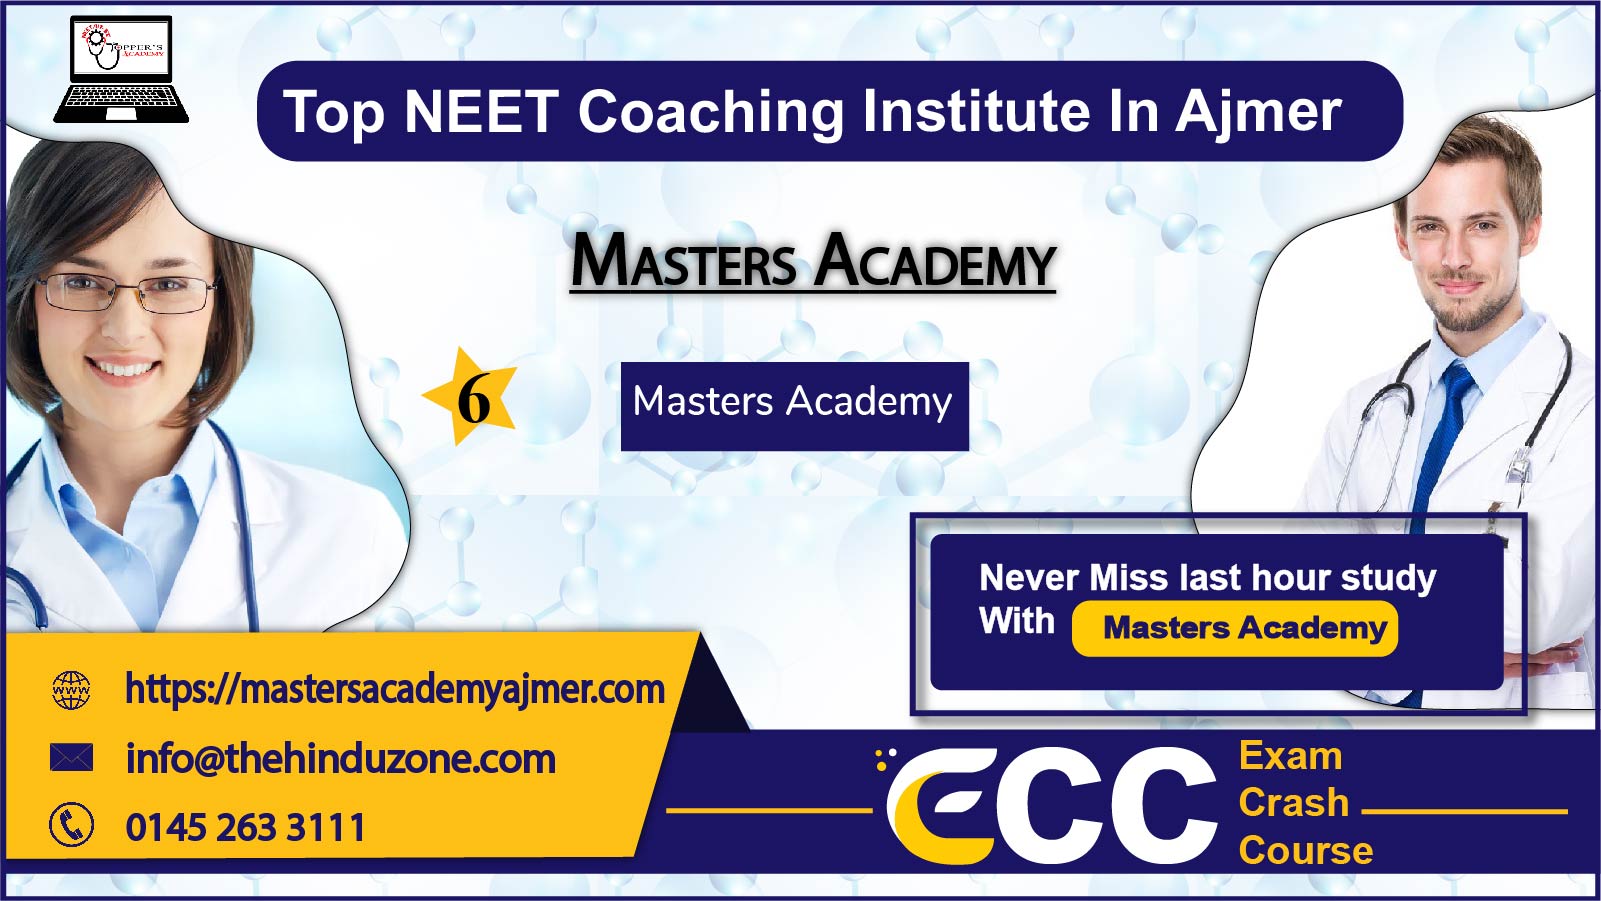 Masters Academy NEET Coaching in Ajmer